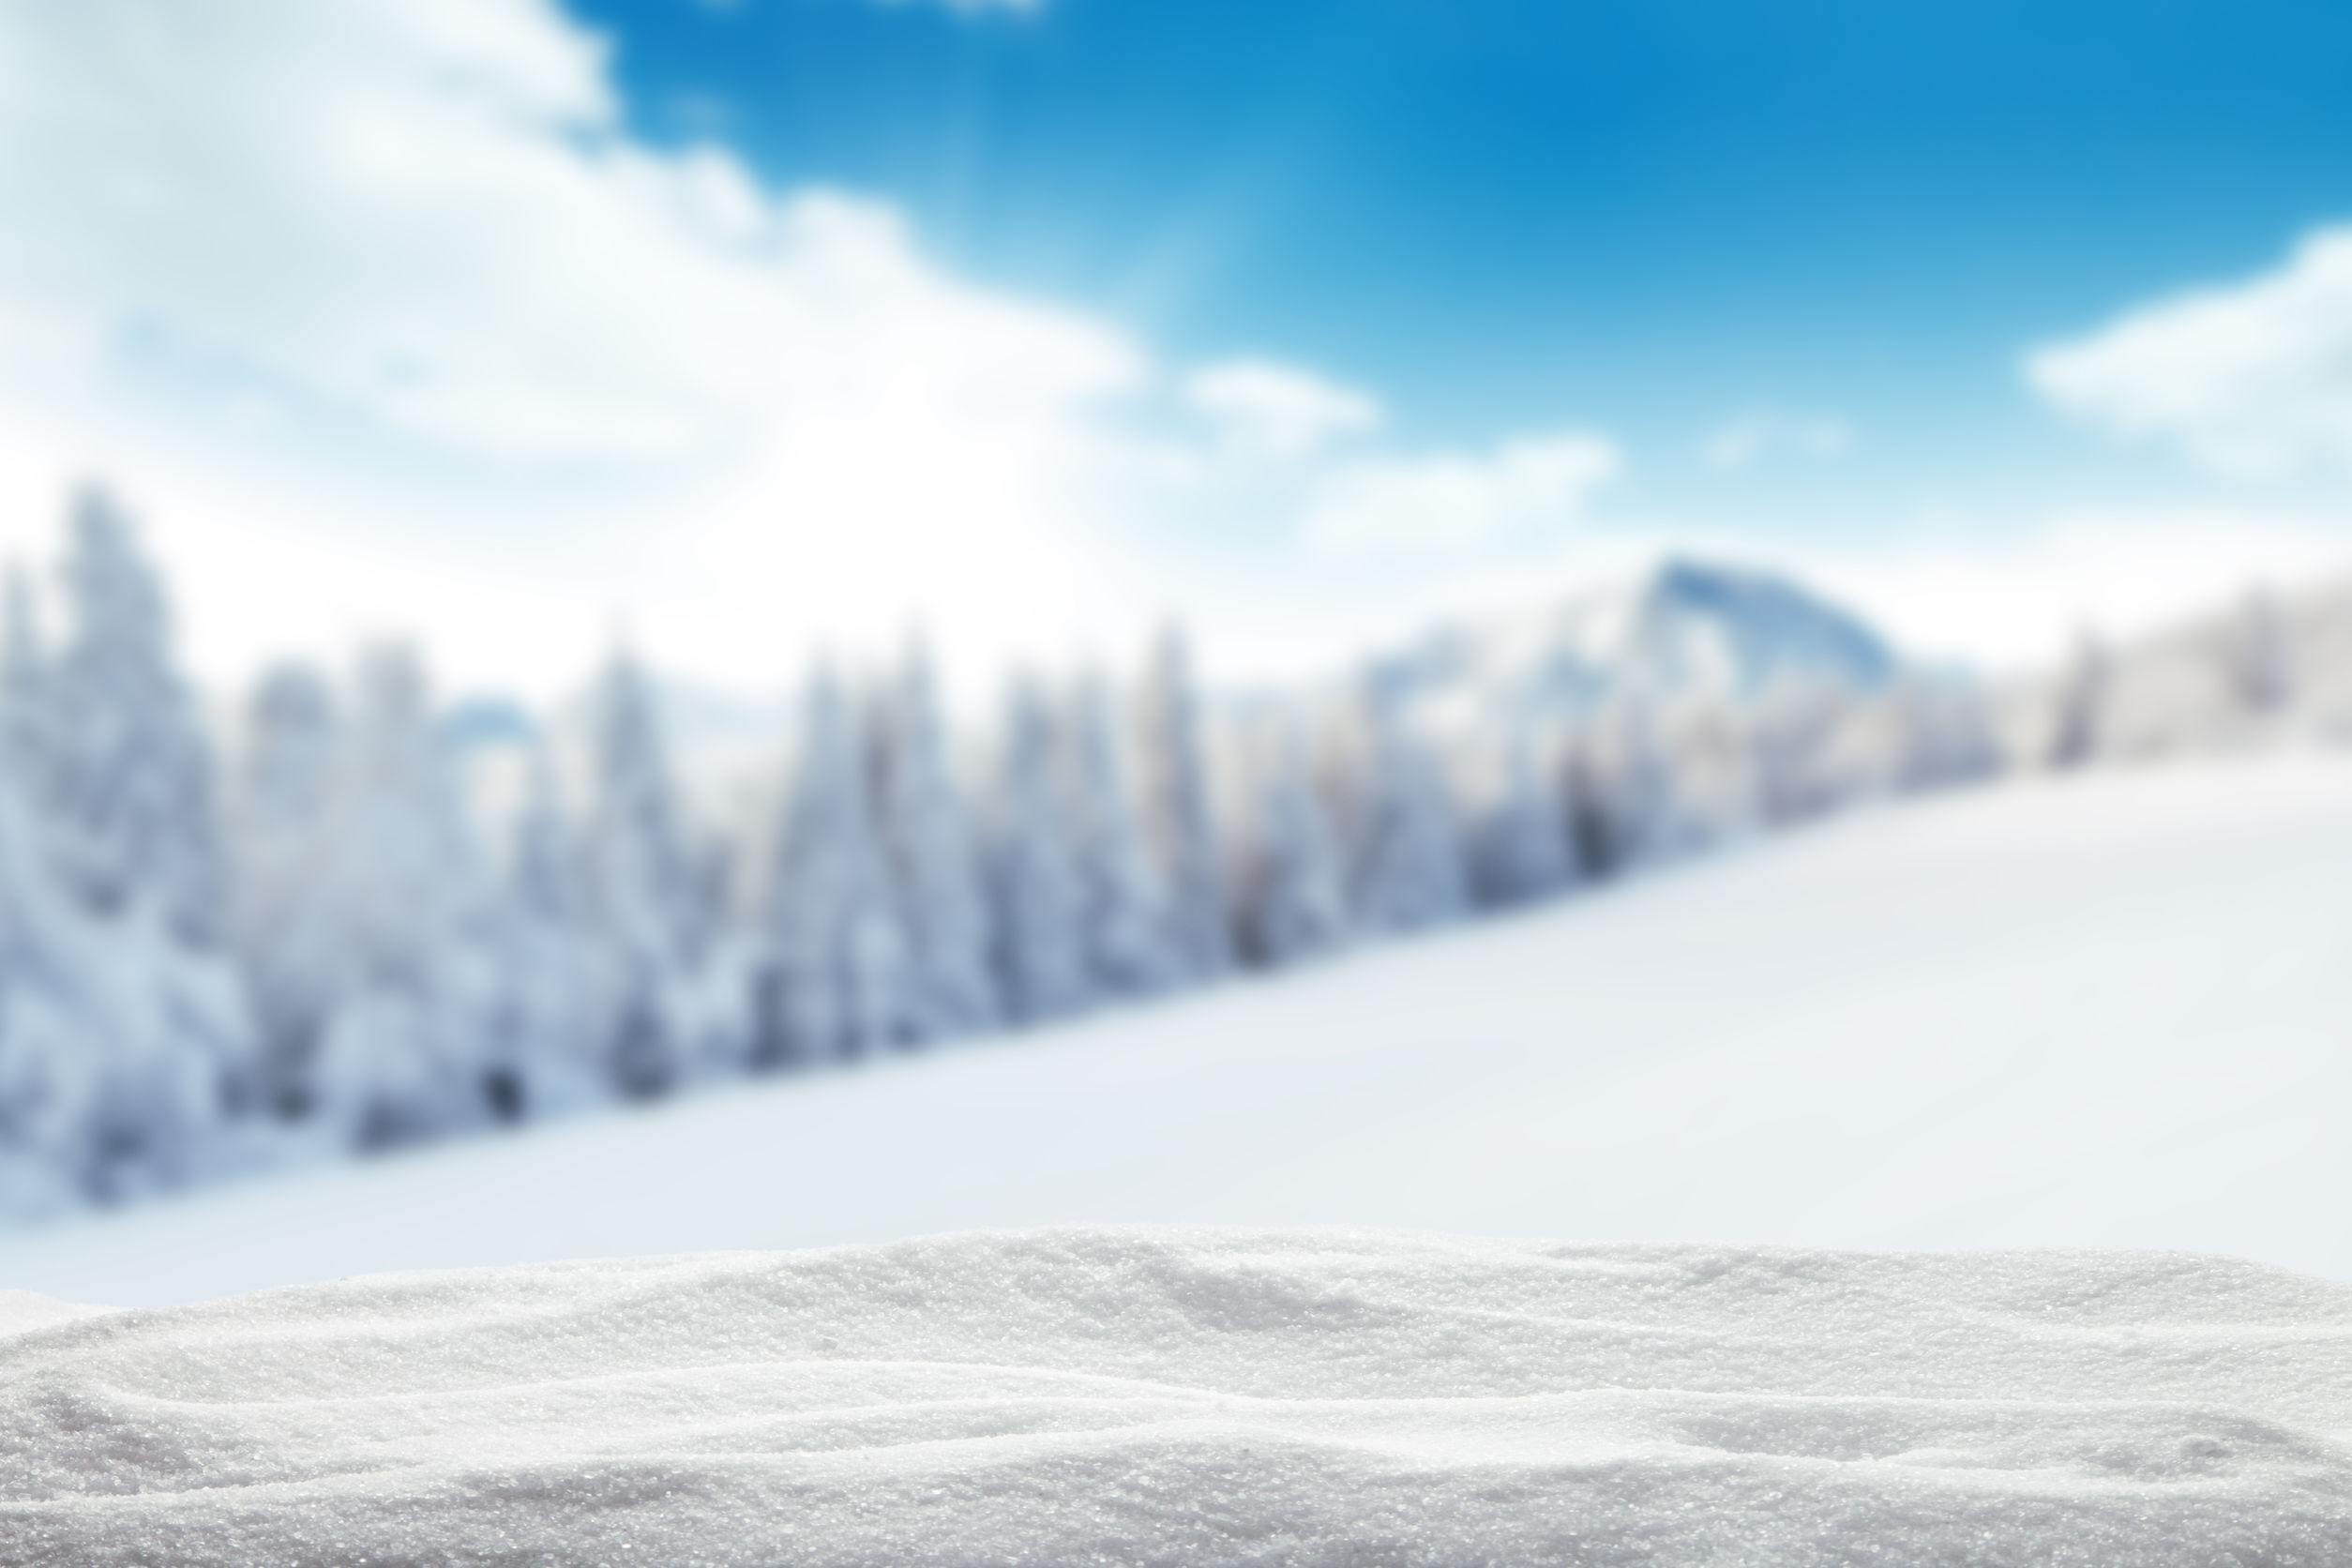 46629080 - winter background with pile of snow and blur landscape. copyspace for text